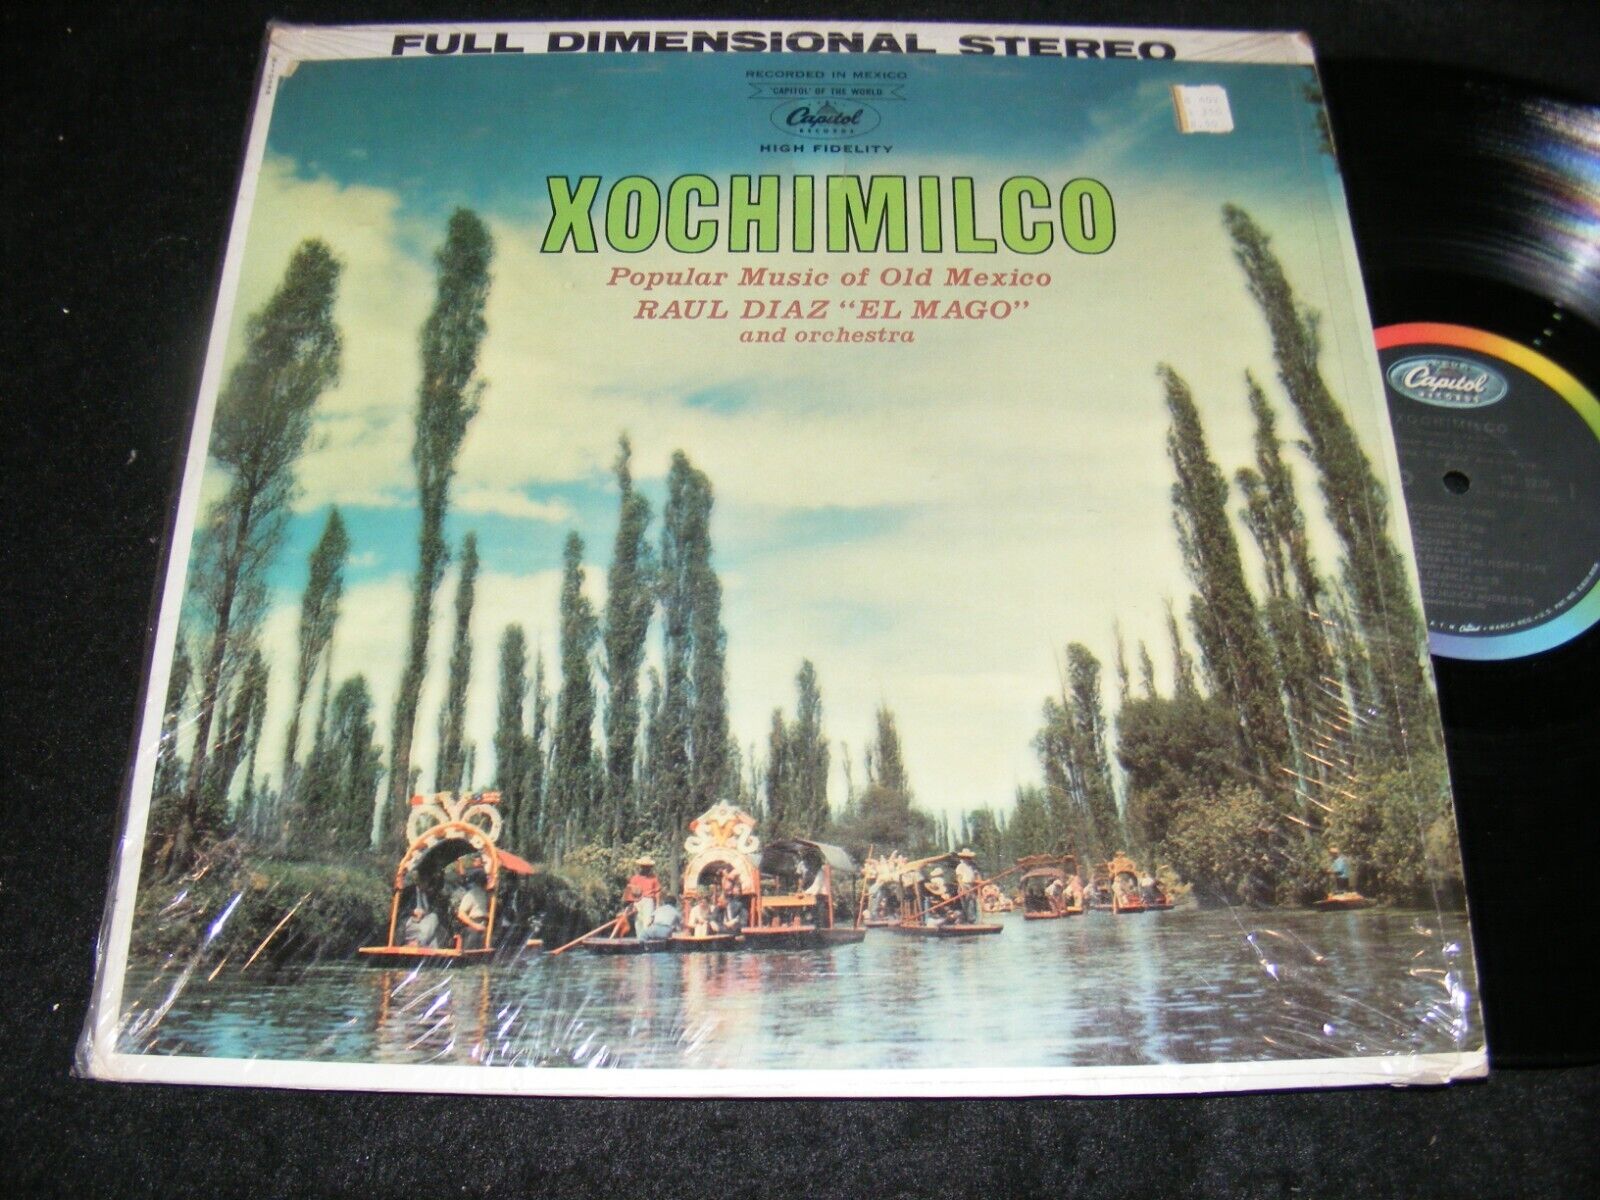 XOCHIMILCO CAPITOL The World LP STEREO BANNER Popular Music of Old Mexico R DIAZ